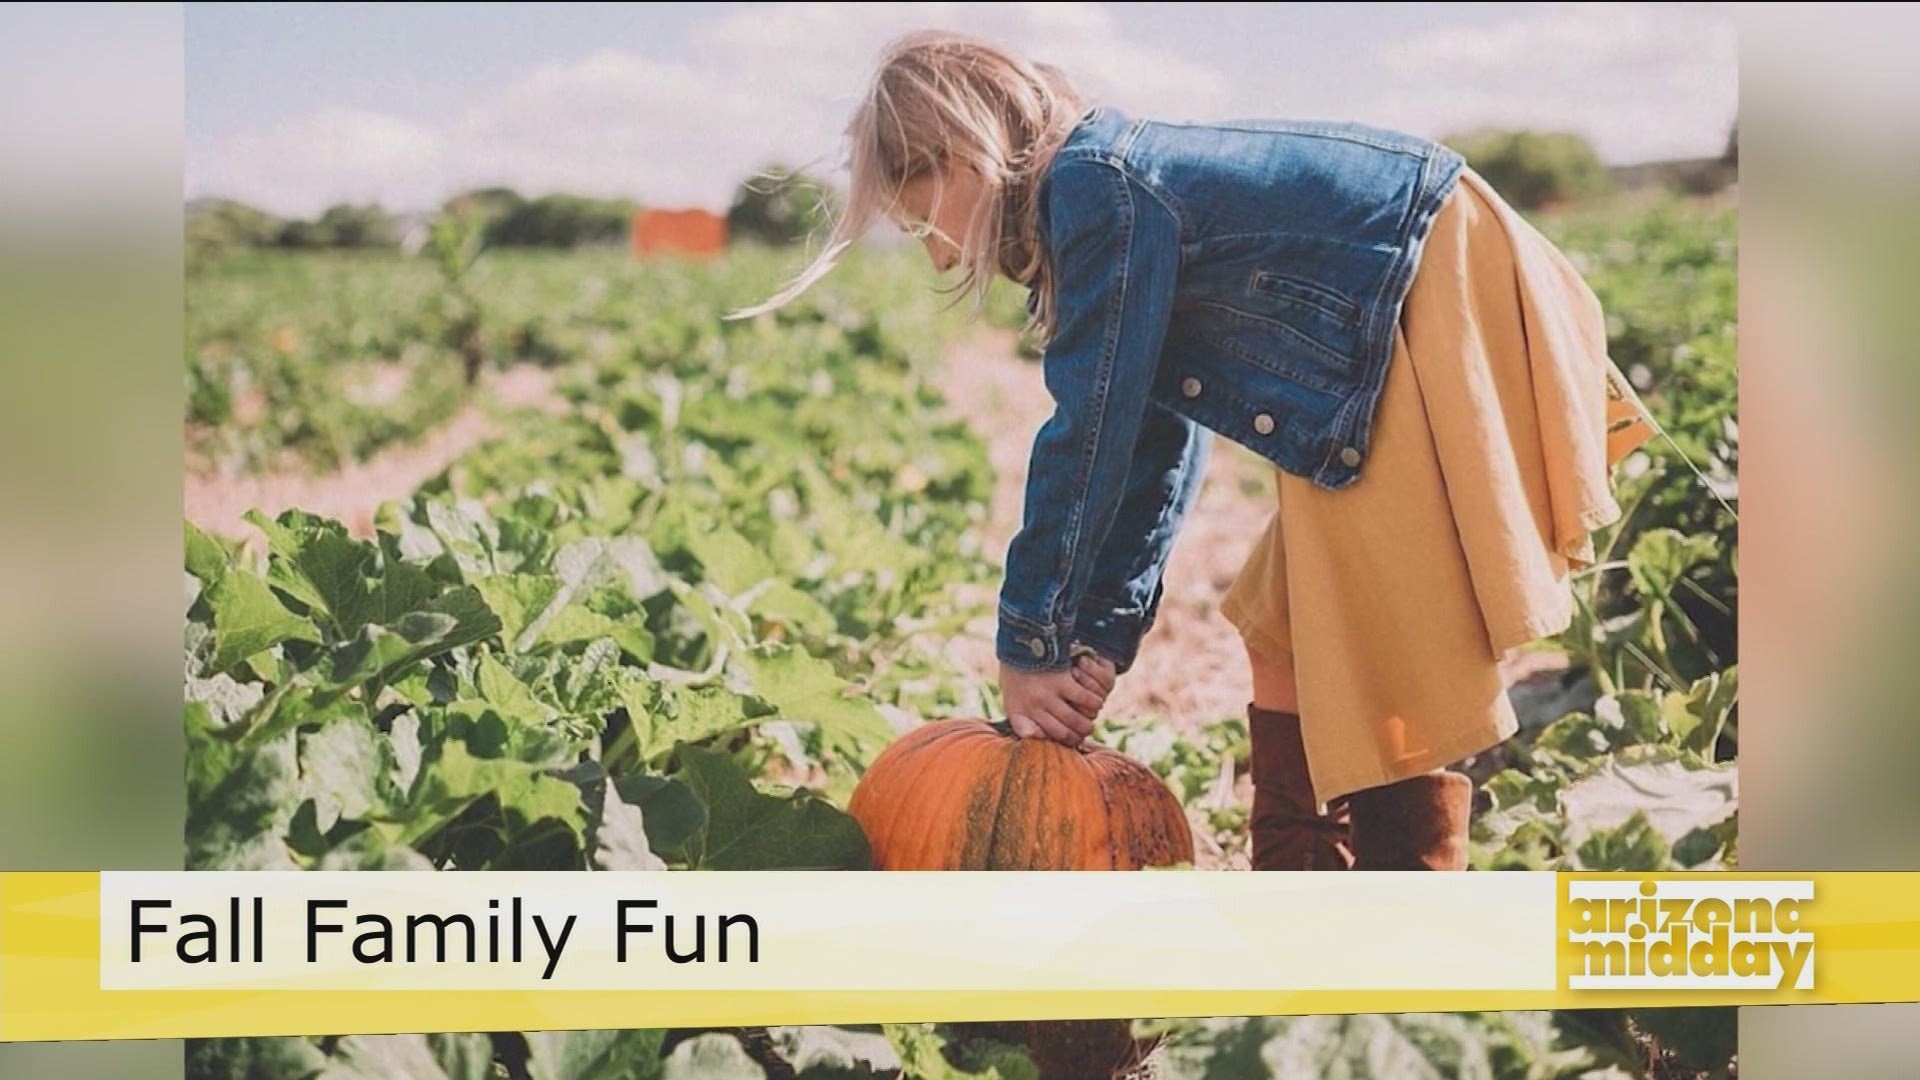 Becky Blaine with Visit Arizona shows us some of her top picks for some festive fall fun around the state